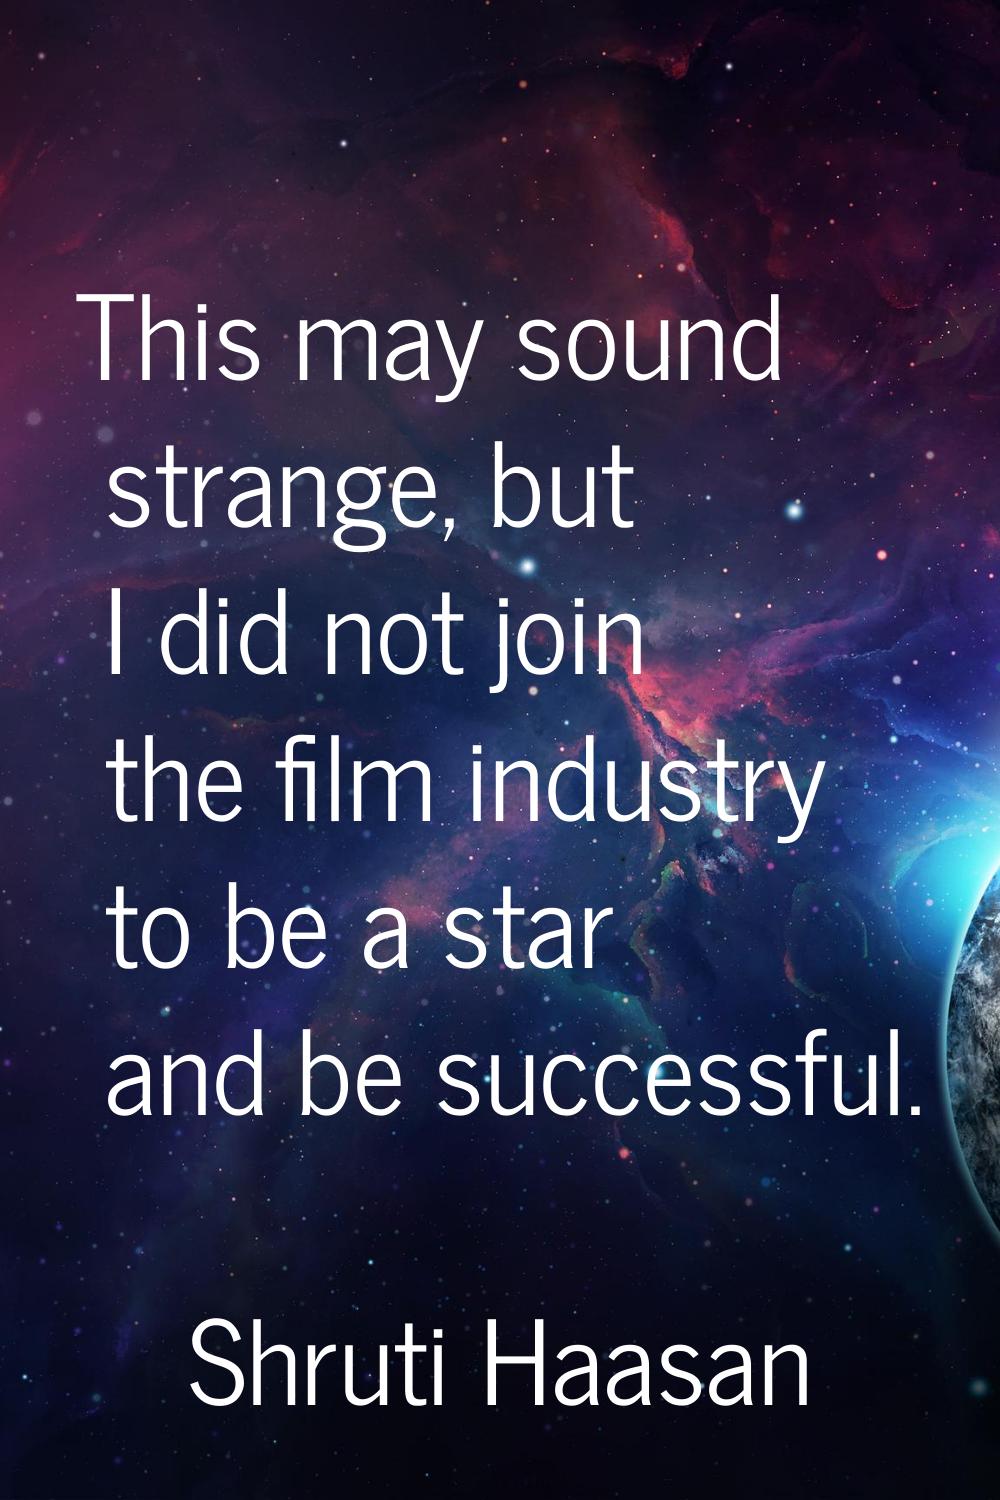 This may sound strange, but I did not join the film industry to be a star and be successful.